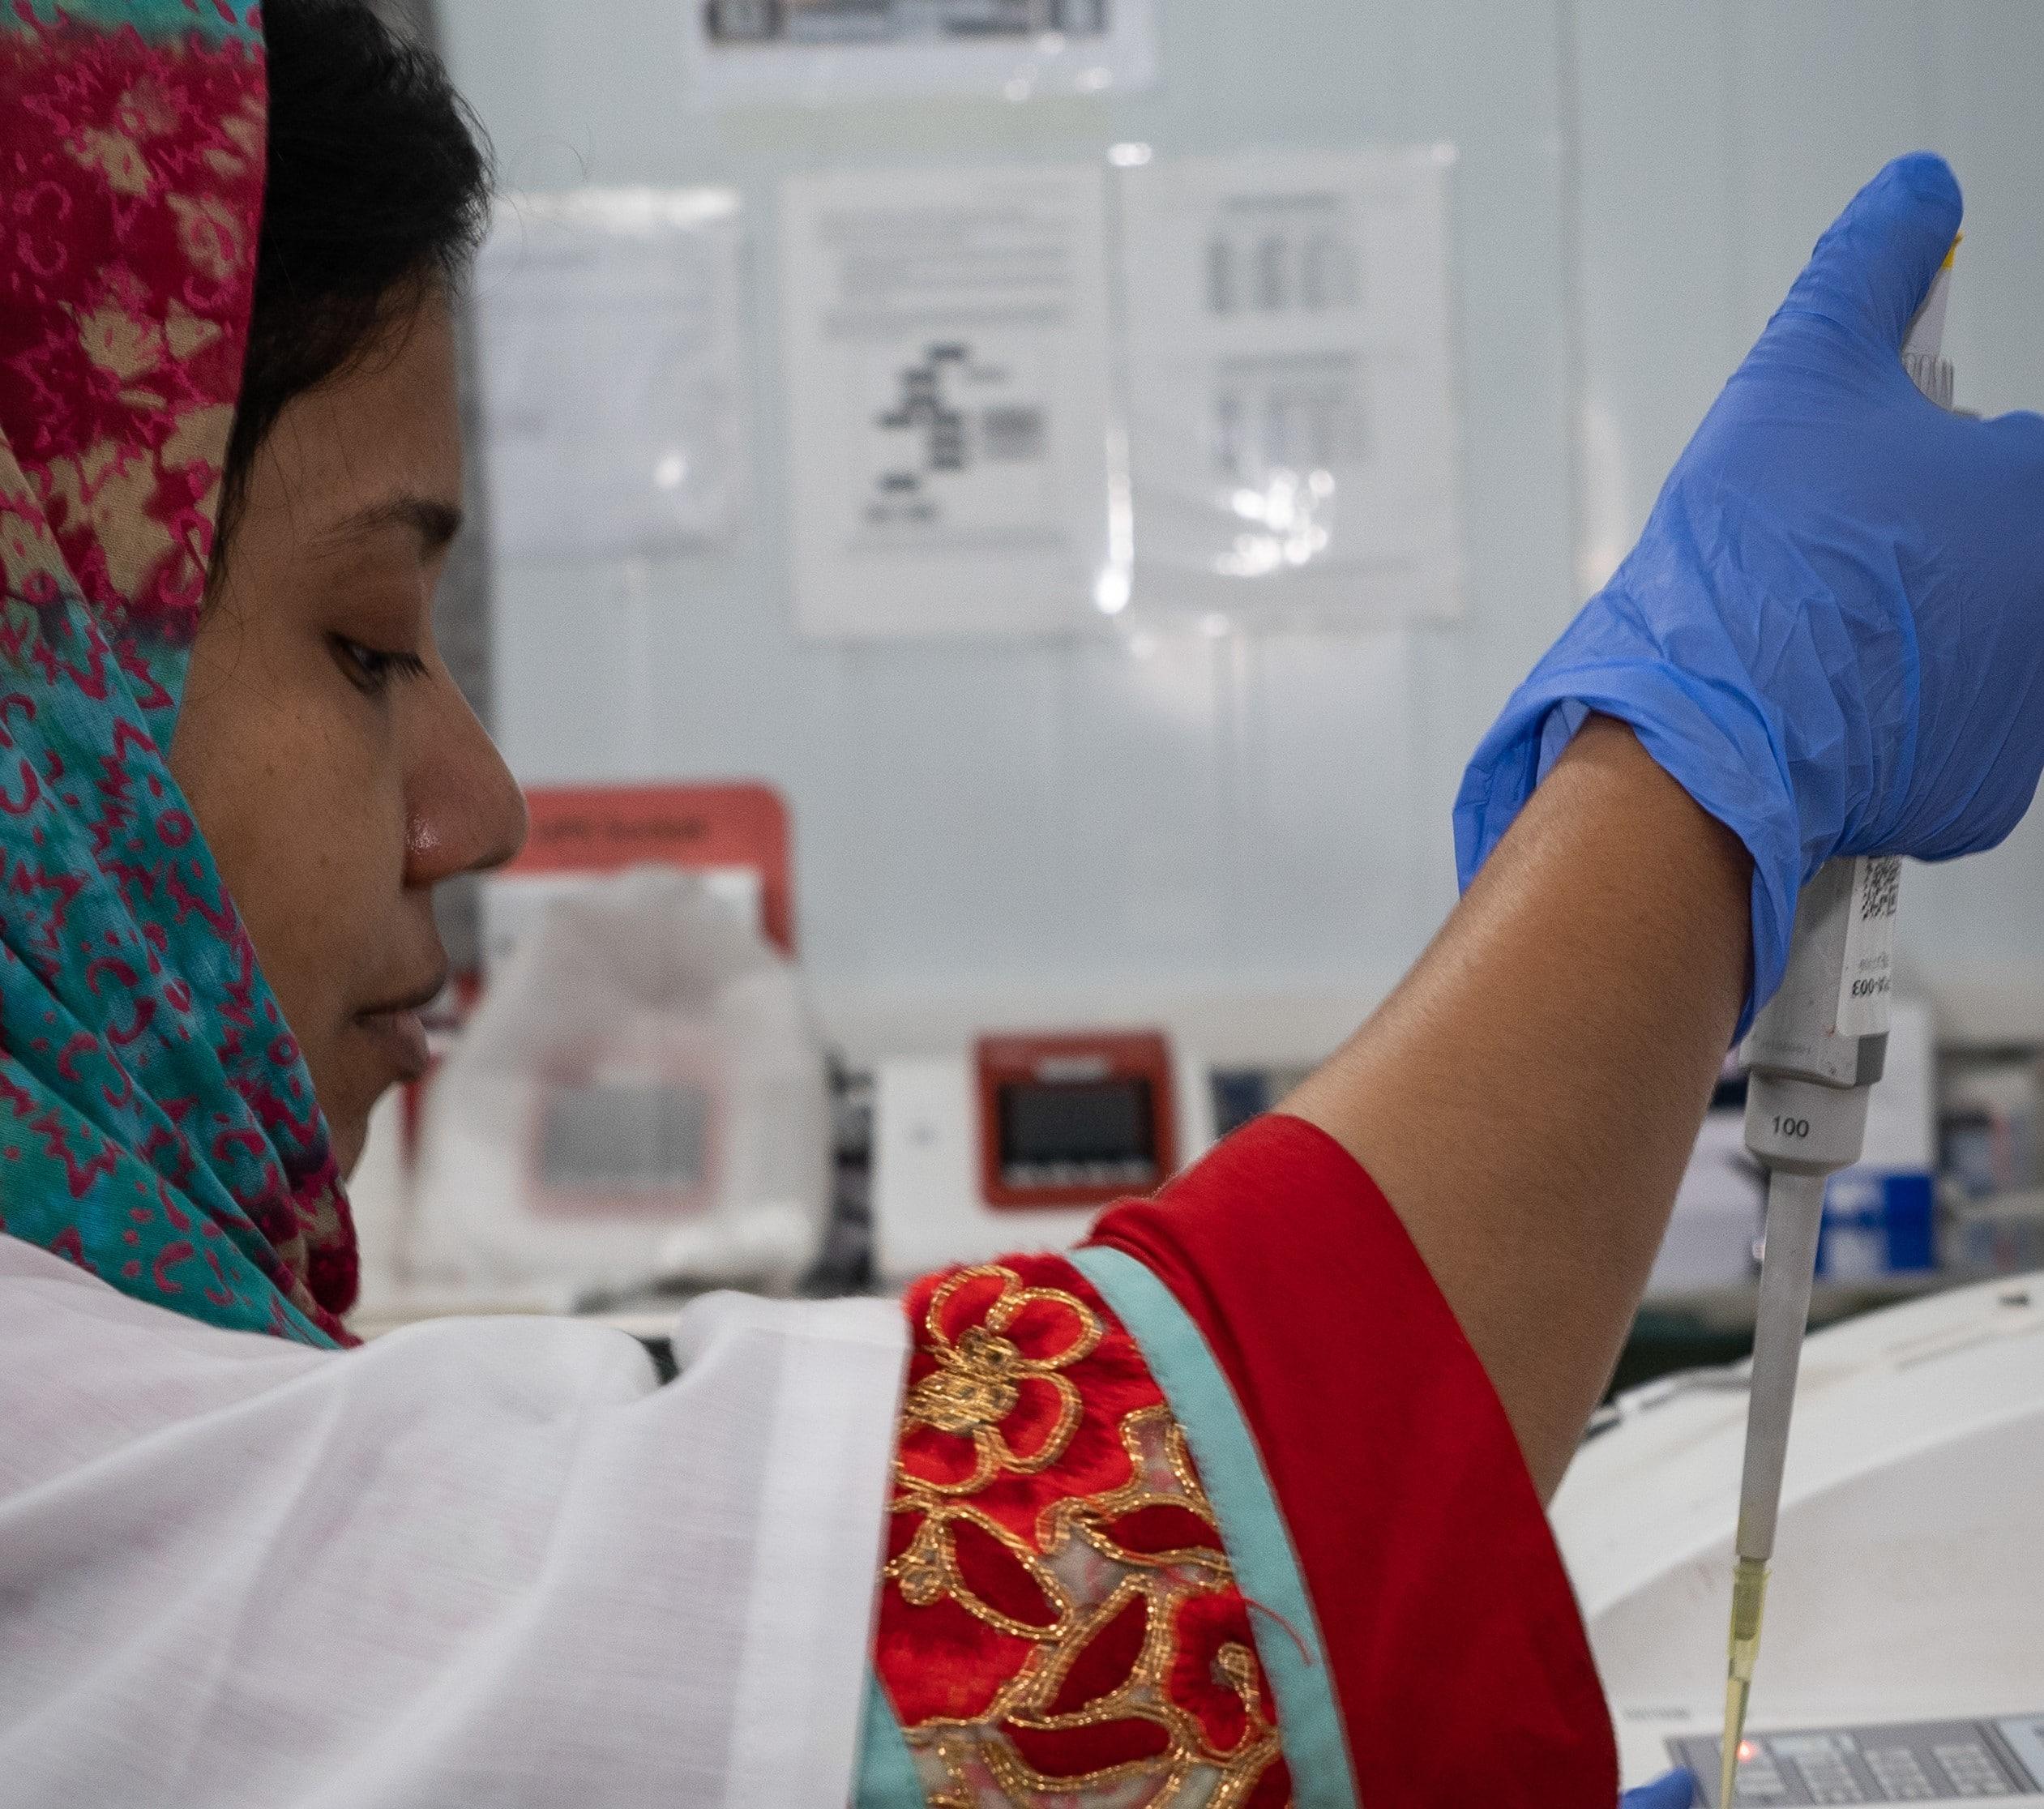 Hep C in Cox's Bazar MSF staff is working at the laboratory of Hospital on the hill, Ukhiya, Cox’s Bazar, Bangladesh.